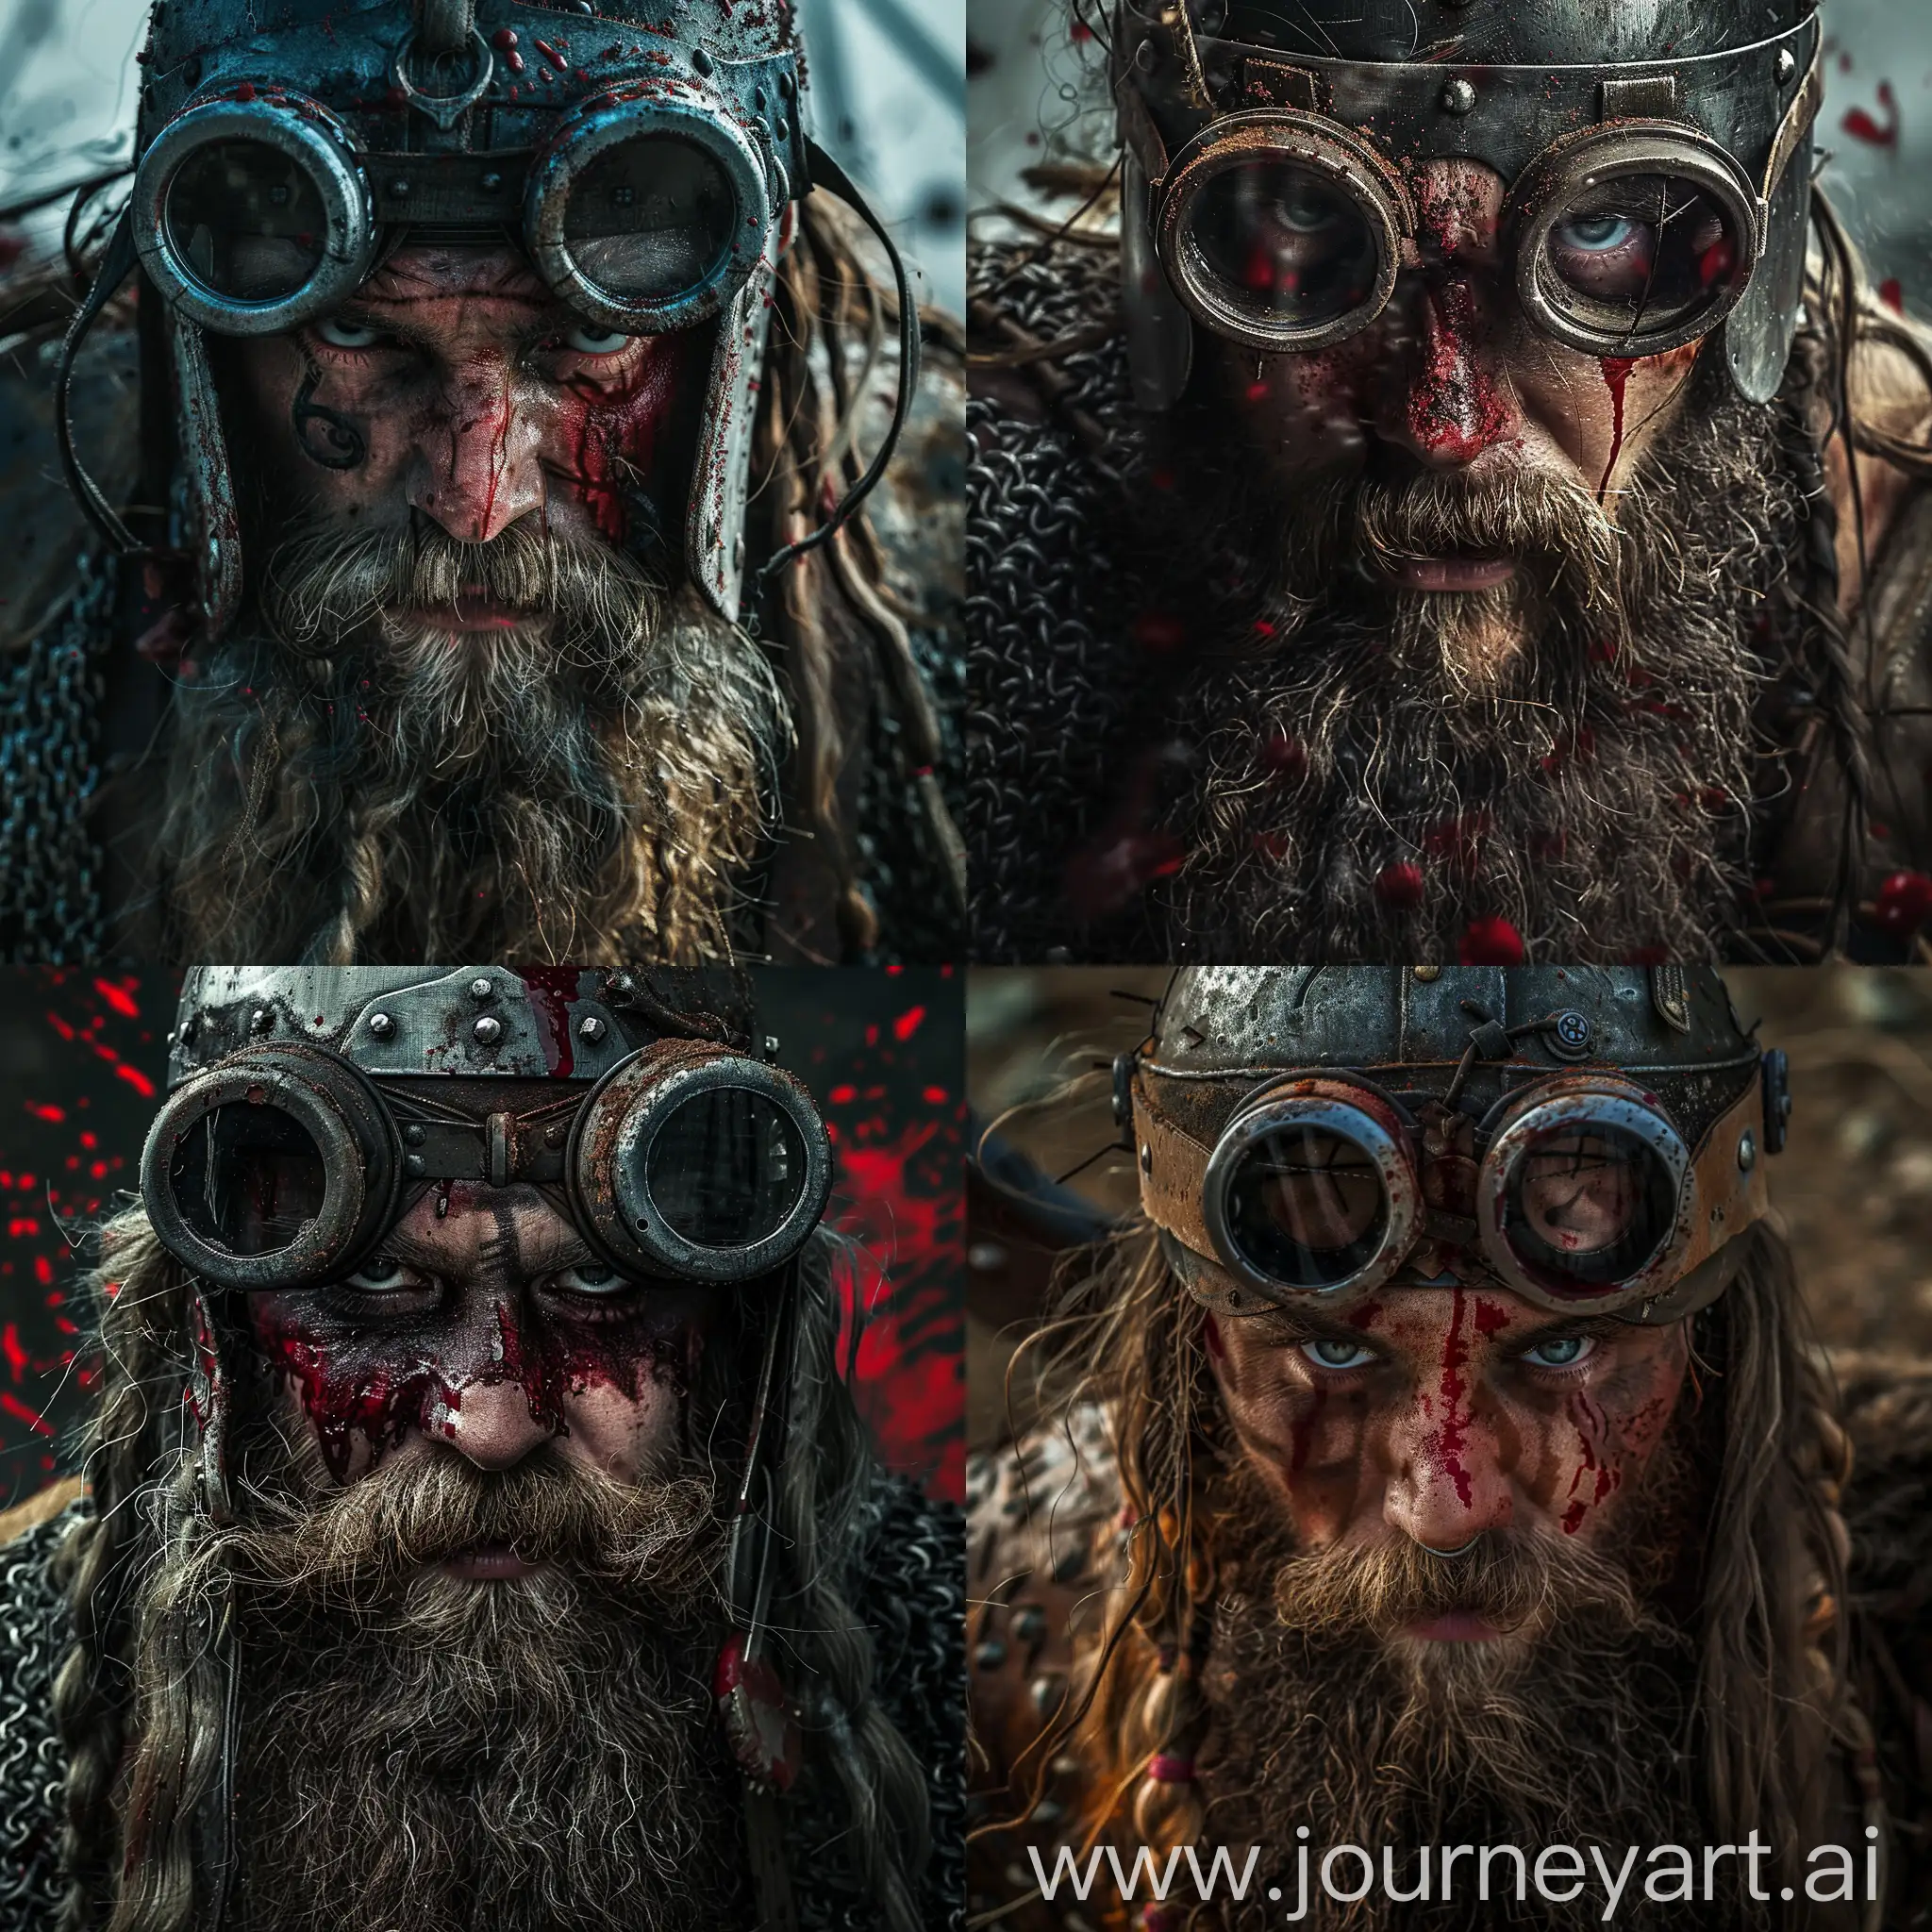 Close up image of a Viking warrior with long beard, goggled viking helmet, scar on his face, battle dirt, crimson liquid, battle scene, dramatic face expression, cinematic lighting